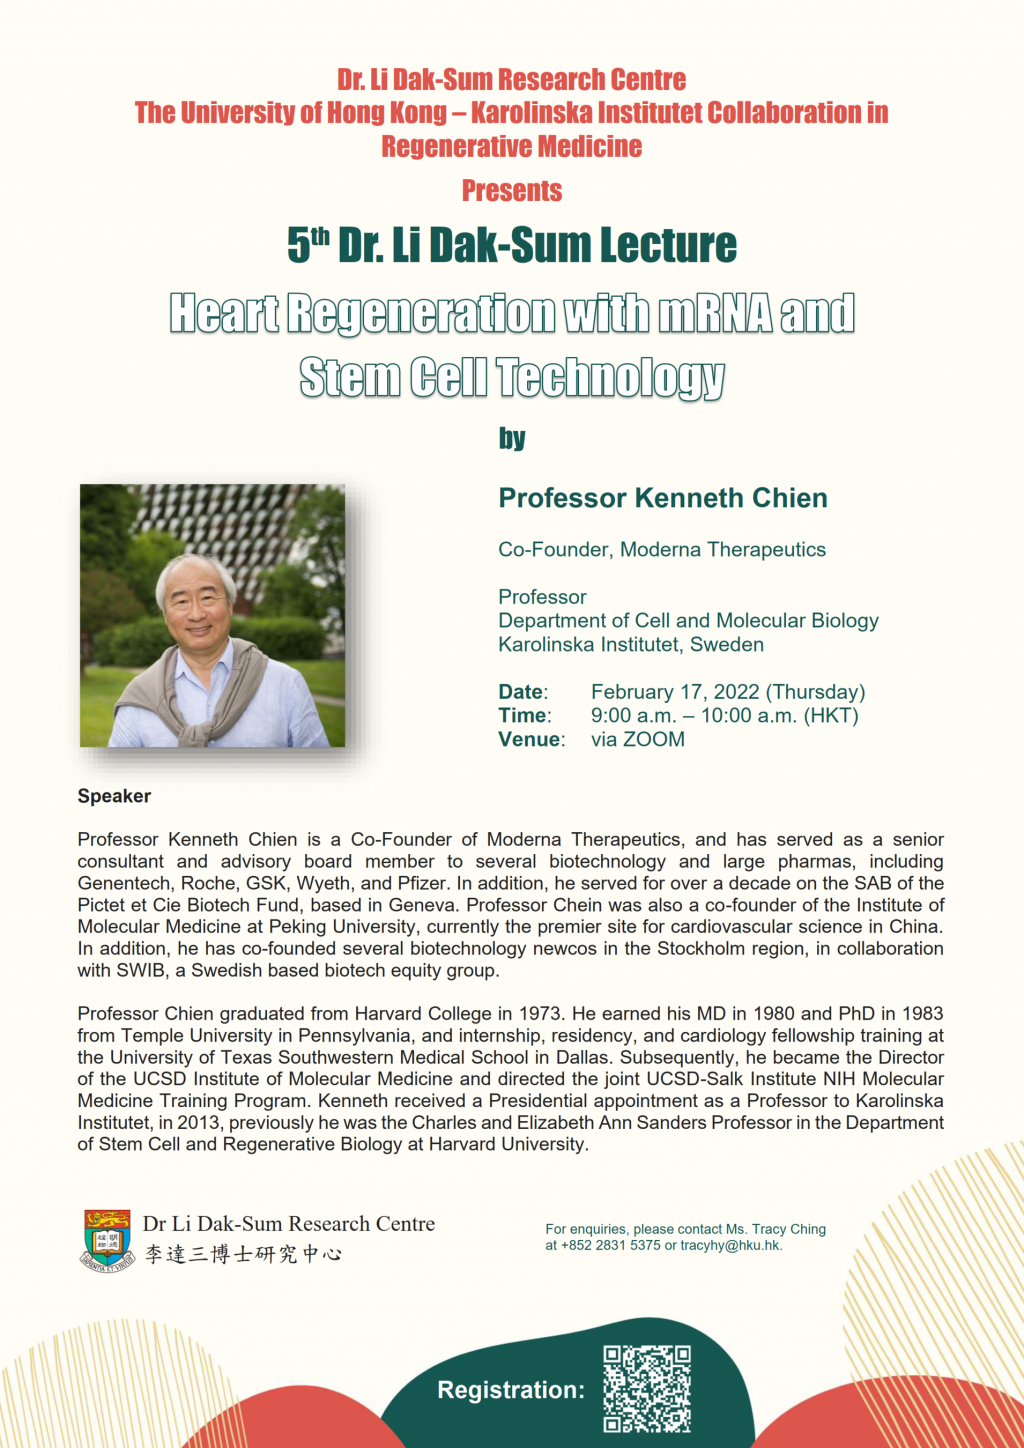 [5th Dr. Li Dak-Sum Lecture] Heart Regeneration with mRNA and Stem Cell Technology by Professor Kenneth Chien